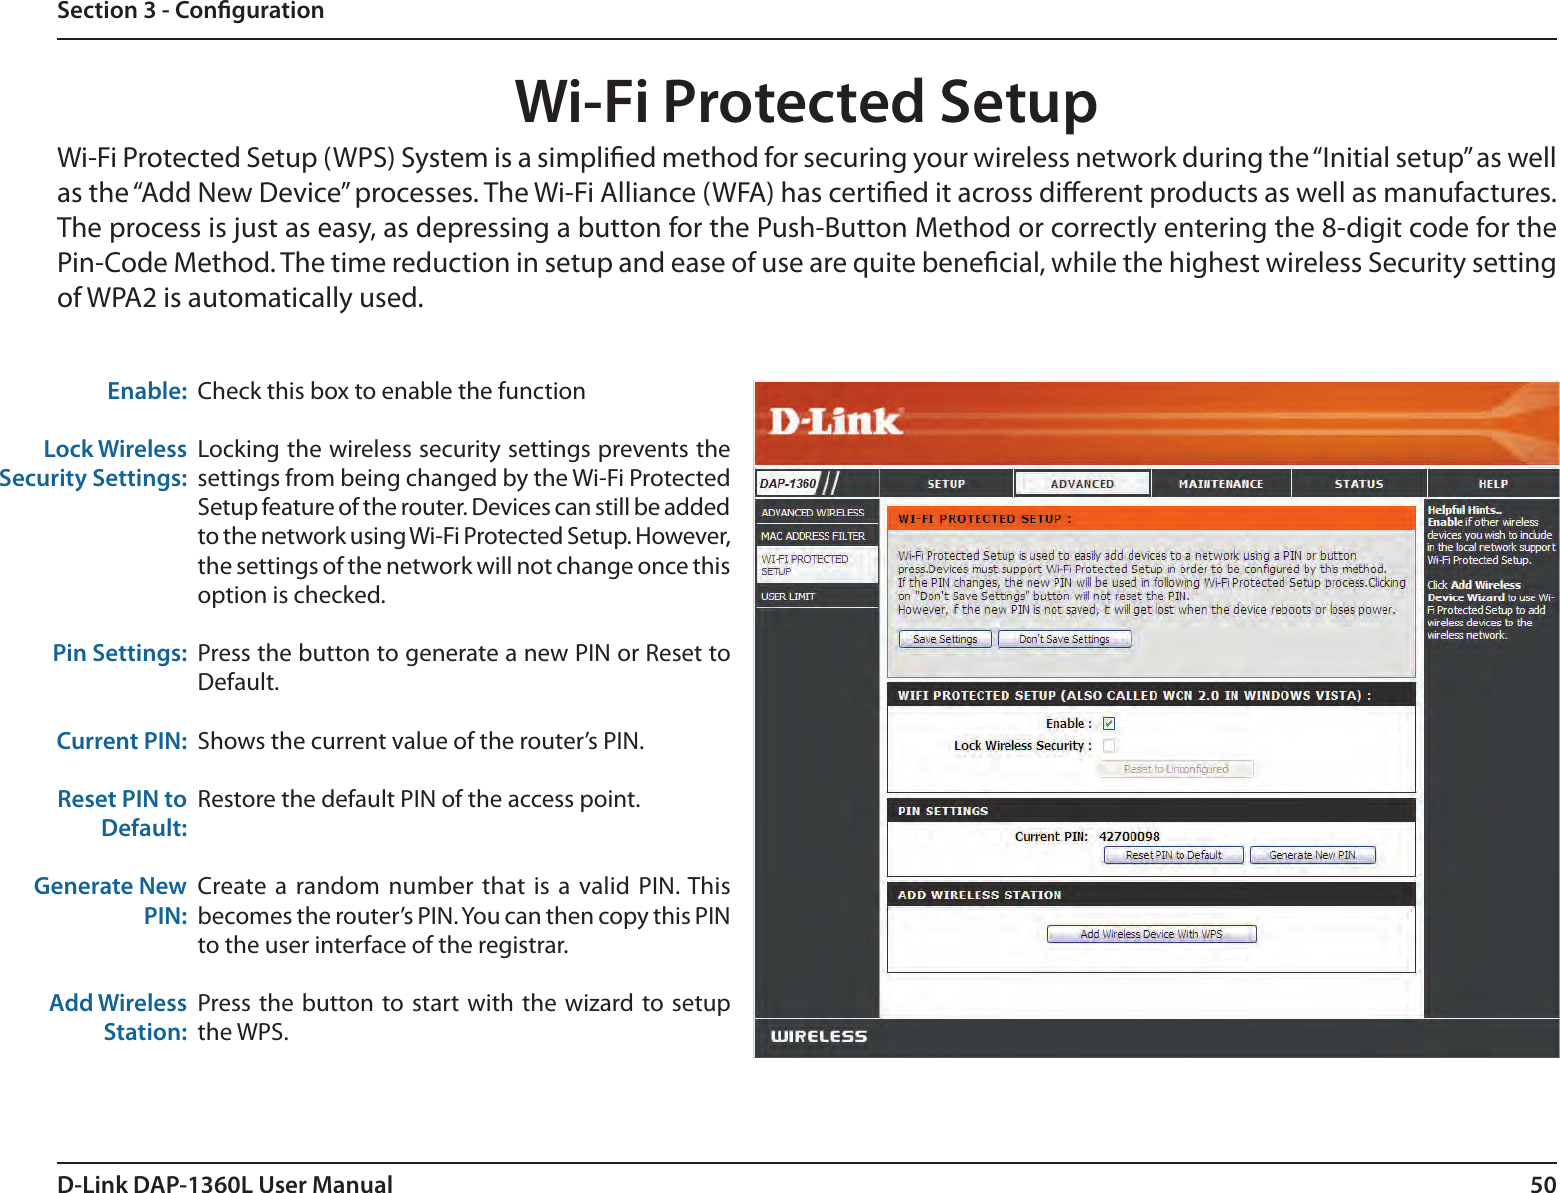 50D-Link DAP-1360L User ManualSection 3 - CongurationWi-Fi Protected SetupCheck this box to enable the functionLocking the wireless security settings prevents the settings from being changed by the Wi-Fi Protected Setup feature of the router. Devices can still be added to the network using Wi-Fi Protected Setup. However, the settings of the network will not change once this option is checked.Press the button to generate a new PIN or Reset to Default. Shows the current value of the router’s PIN.Restore the default PIN of the access point.Create  a random  number  that is  a valid PIN. This becomes the router’s PIN. You can then copy this PIN to the user interface of the registrar.Press the button to start  with  the  wizard to setup the WPS. Enable:Lock Wireless Security Settings:Pin Settings:Current PIN:Reset PIN to Default:Generate New PIN:Add Wireless Station:Wi-Fi Protected Setup (WPS) System is a simplied method for securing your wireless network during the “Initial setup” as well as the “Add New Device” processes. The Wi-Fi Alliance (WFA) has certied it across dierent products as well as manufactures. The process is just as easy, as depressing a button for the Push-Button Method or correctly entering the 8-digit code for the Pin-Code Method. The time reduction in setup and ease of use are quite benecial, while the highest wireless Security setting of WPA2 is automatically used.